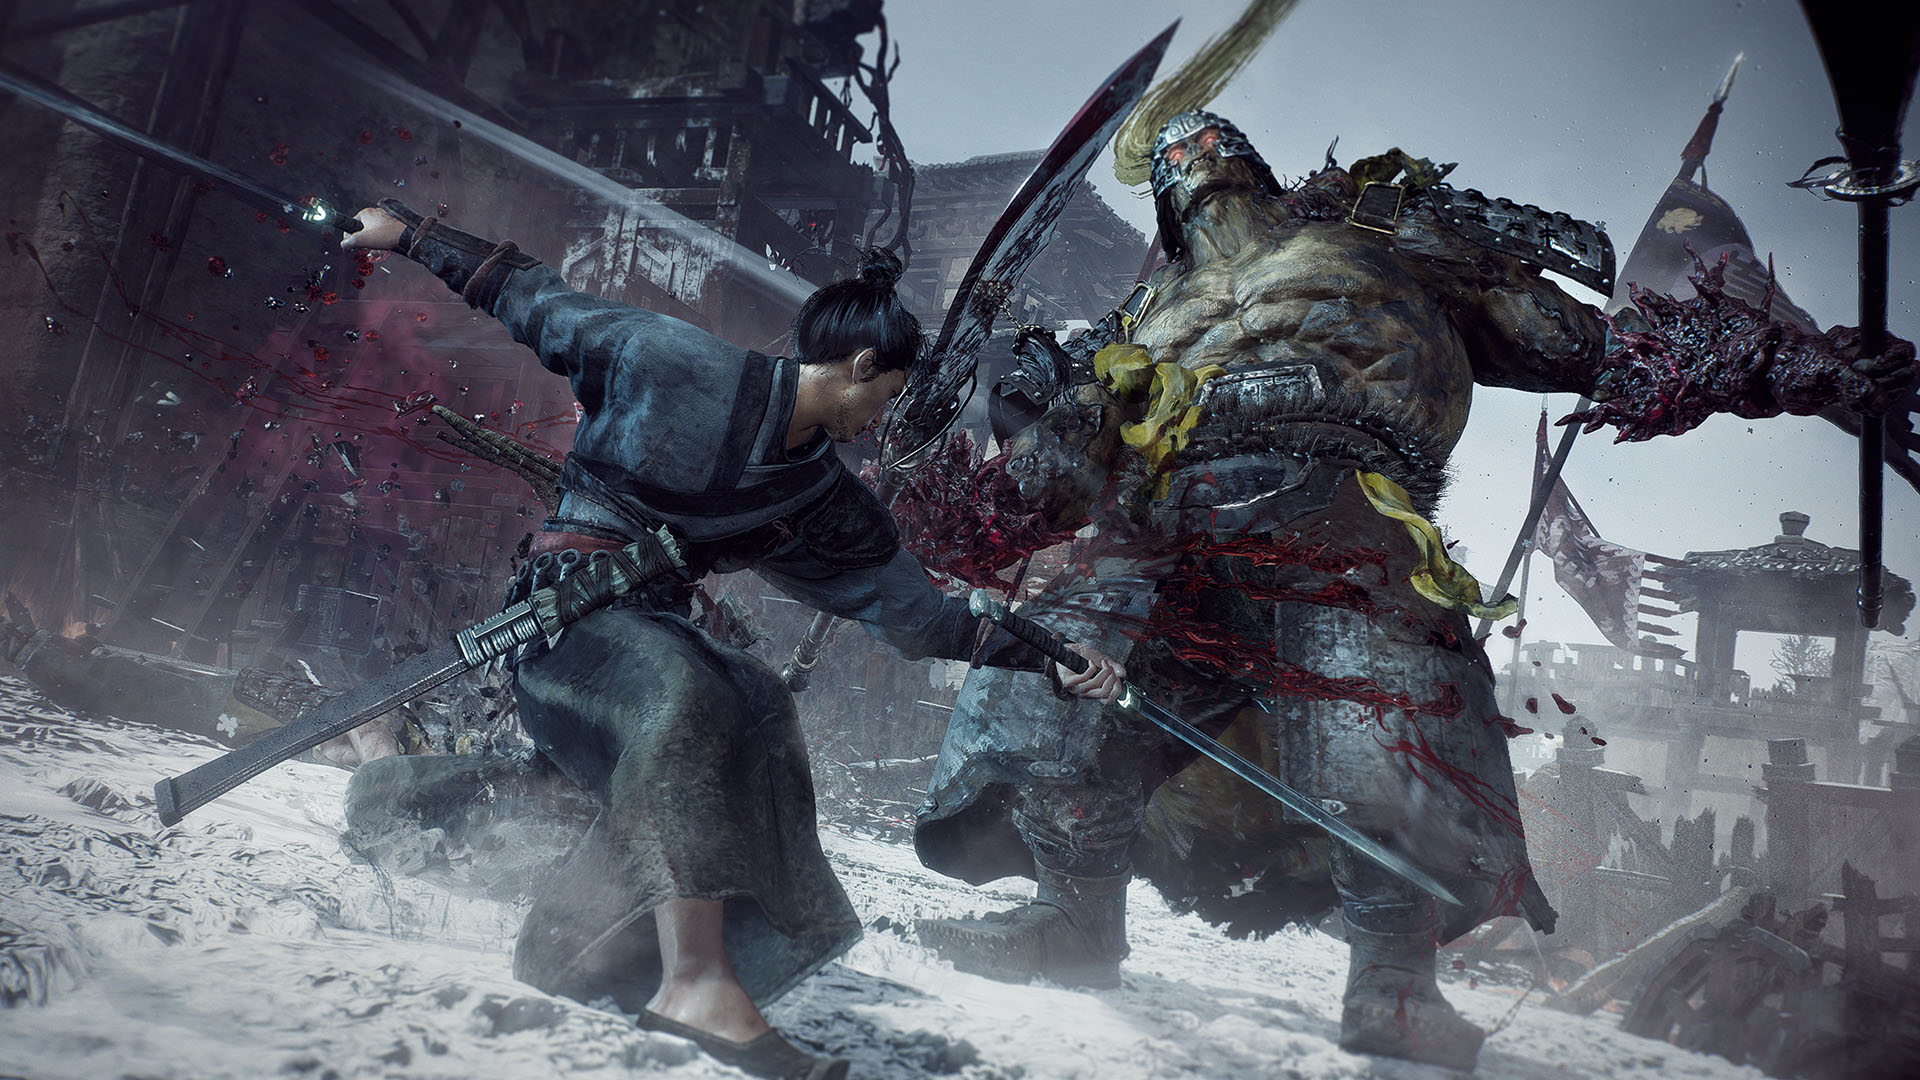 Ghost of Tsushima: System requirements